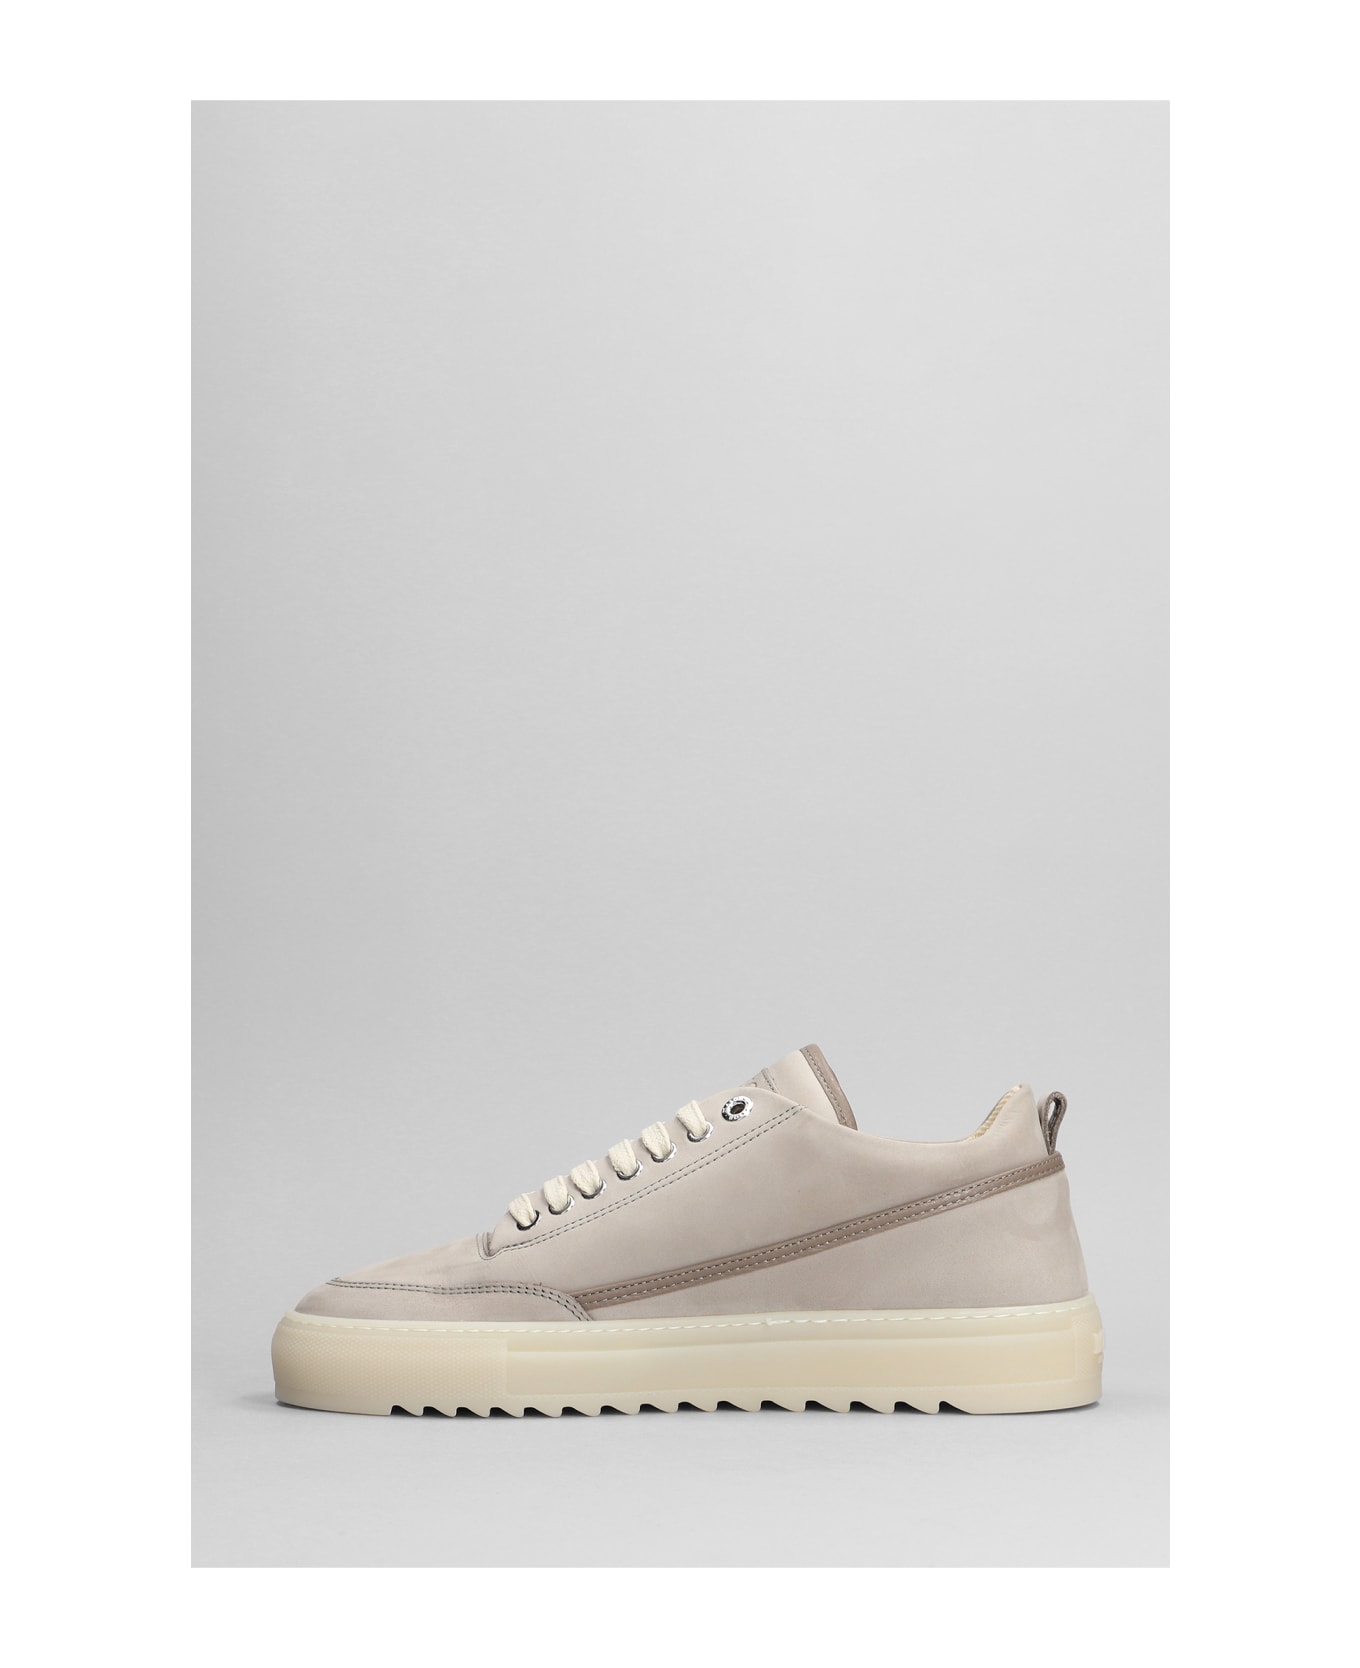 Mason Garments Torino Sneakers In Taupe Leather - taupe